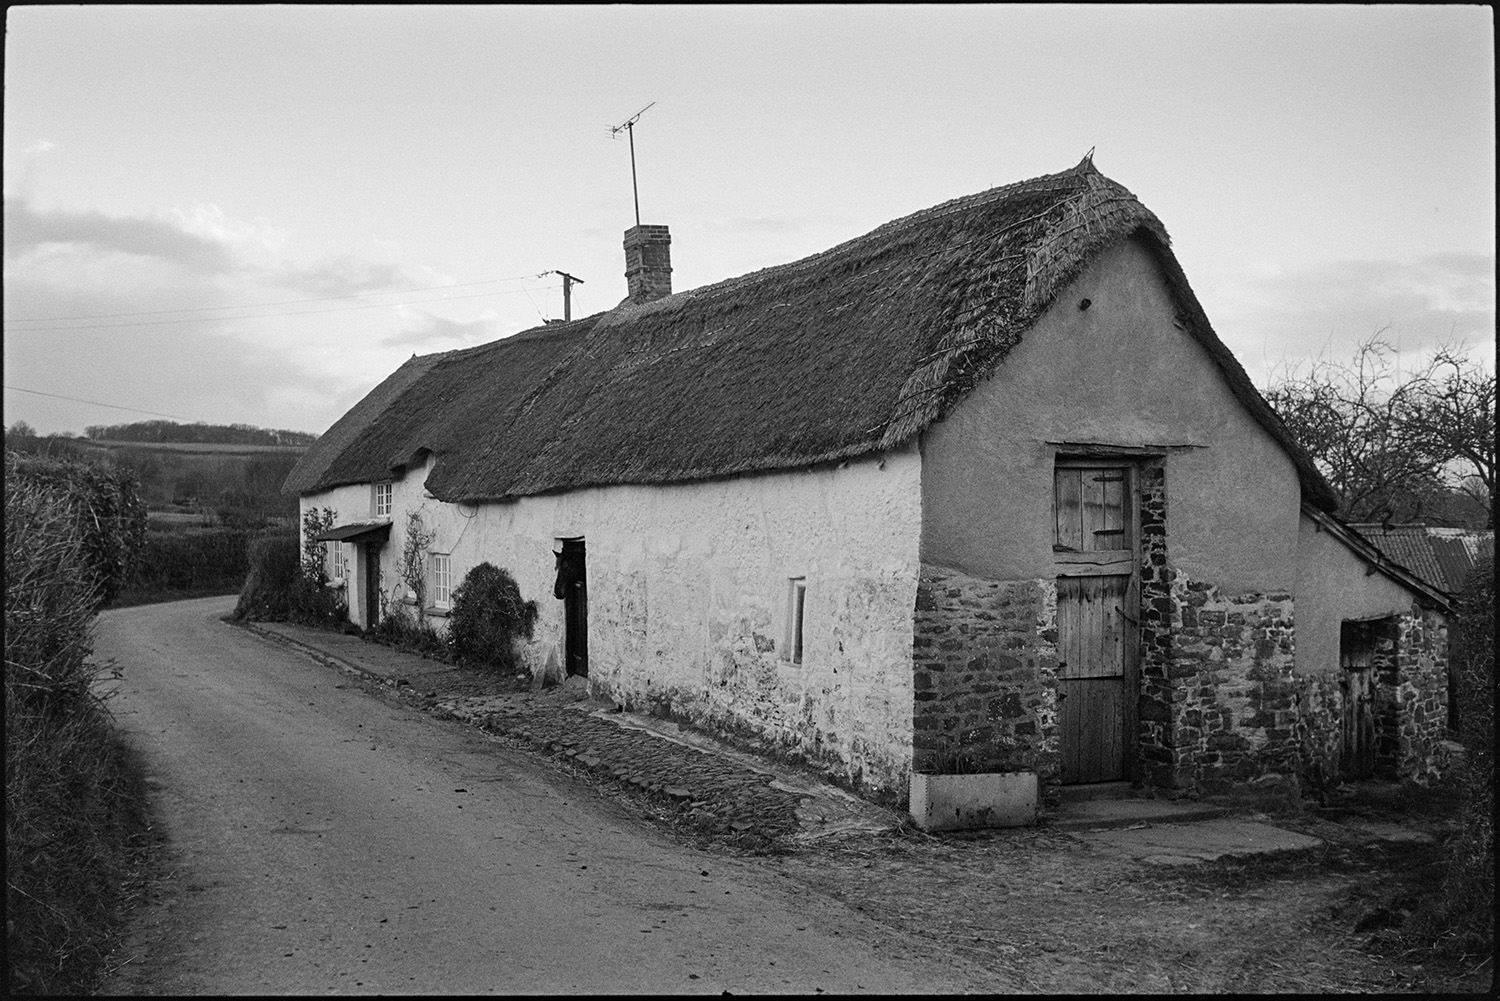 Thatch and cob Devon longhouse.
[Cob and thatched longhouse at Rashleigh Mill, Ashreigney. A tallet can be seen at one end of the longhouse and a horse is looking out of a stable doorway onto the road outside.]